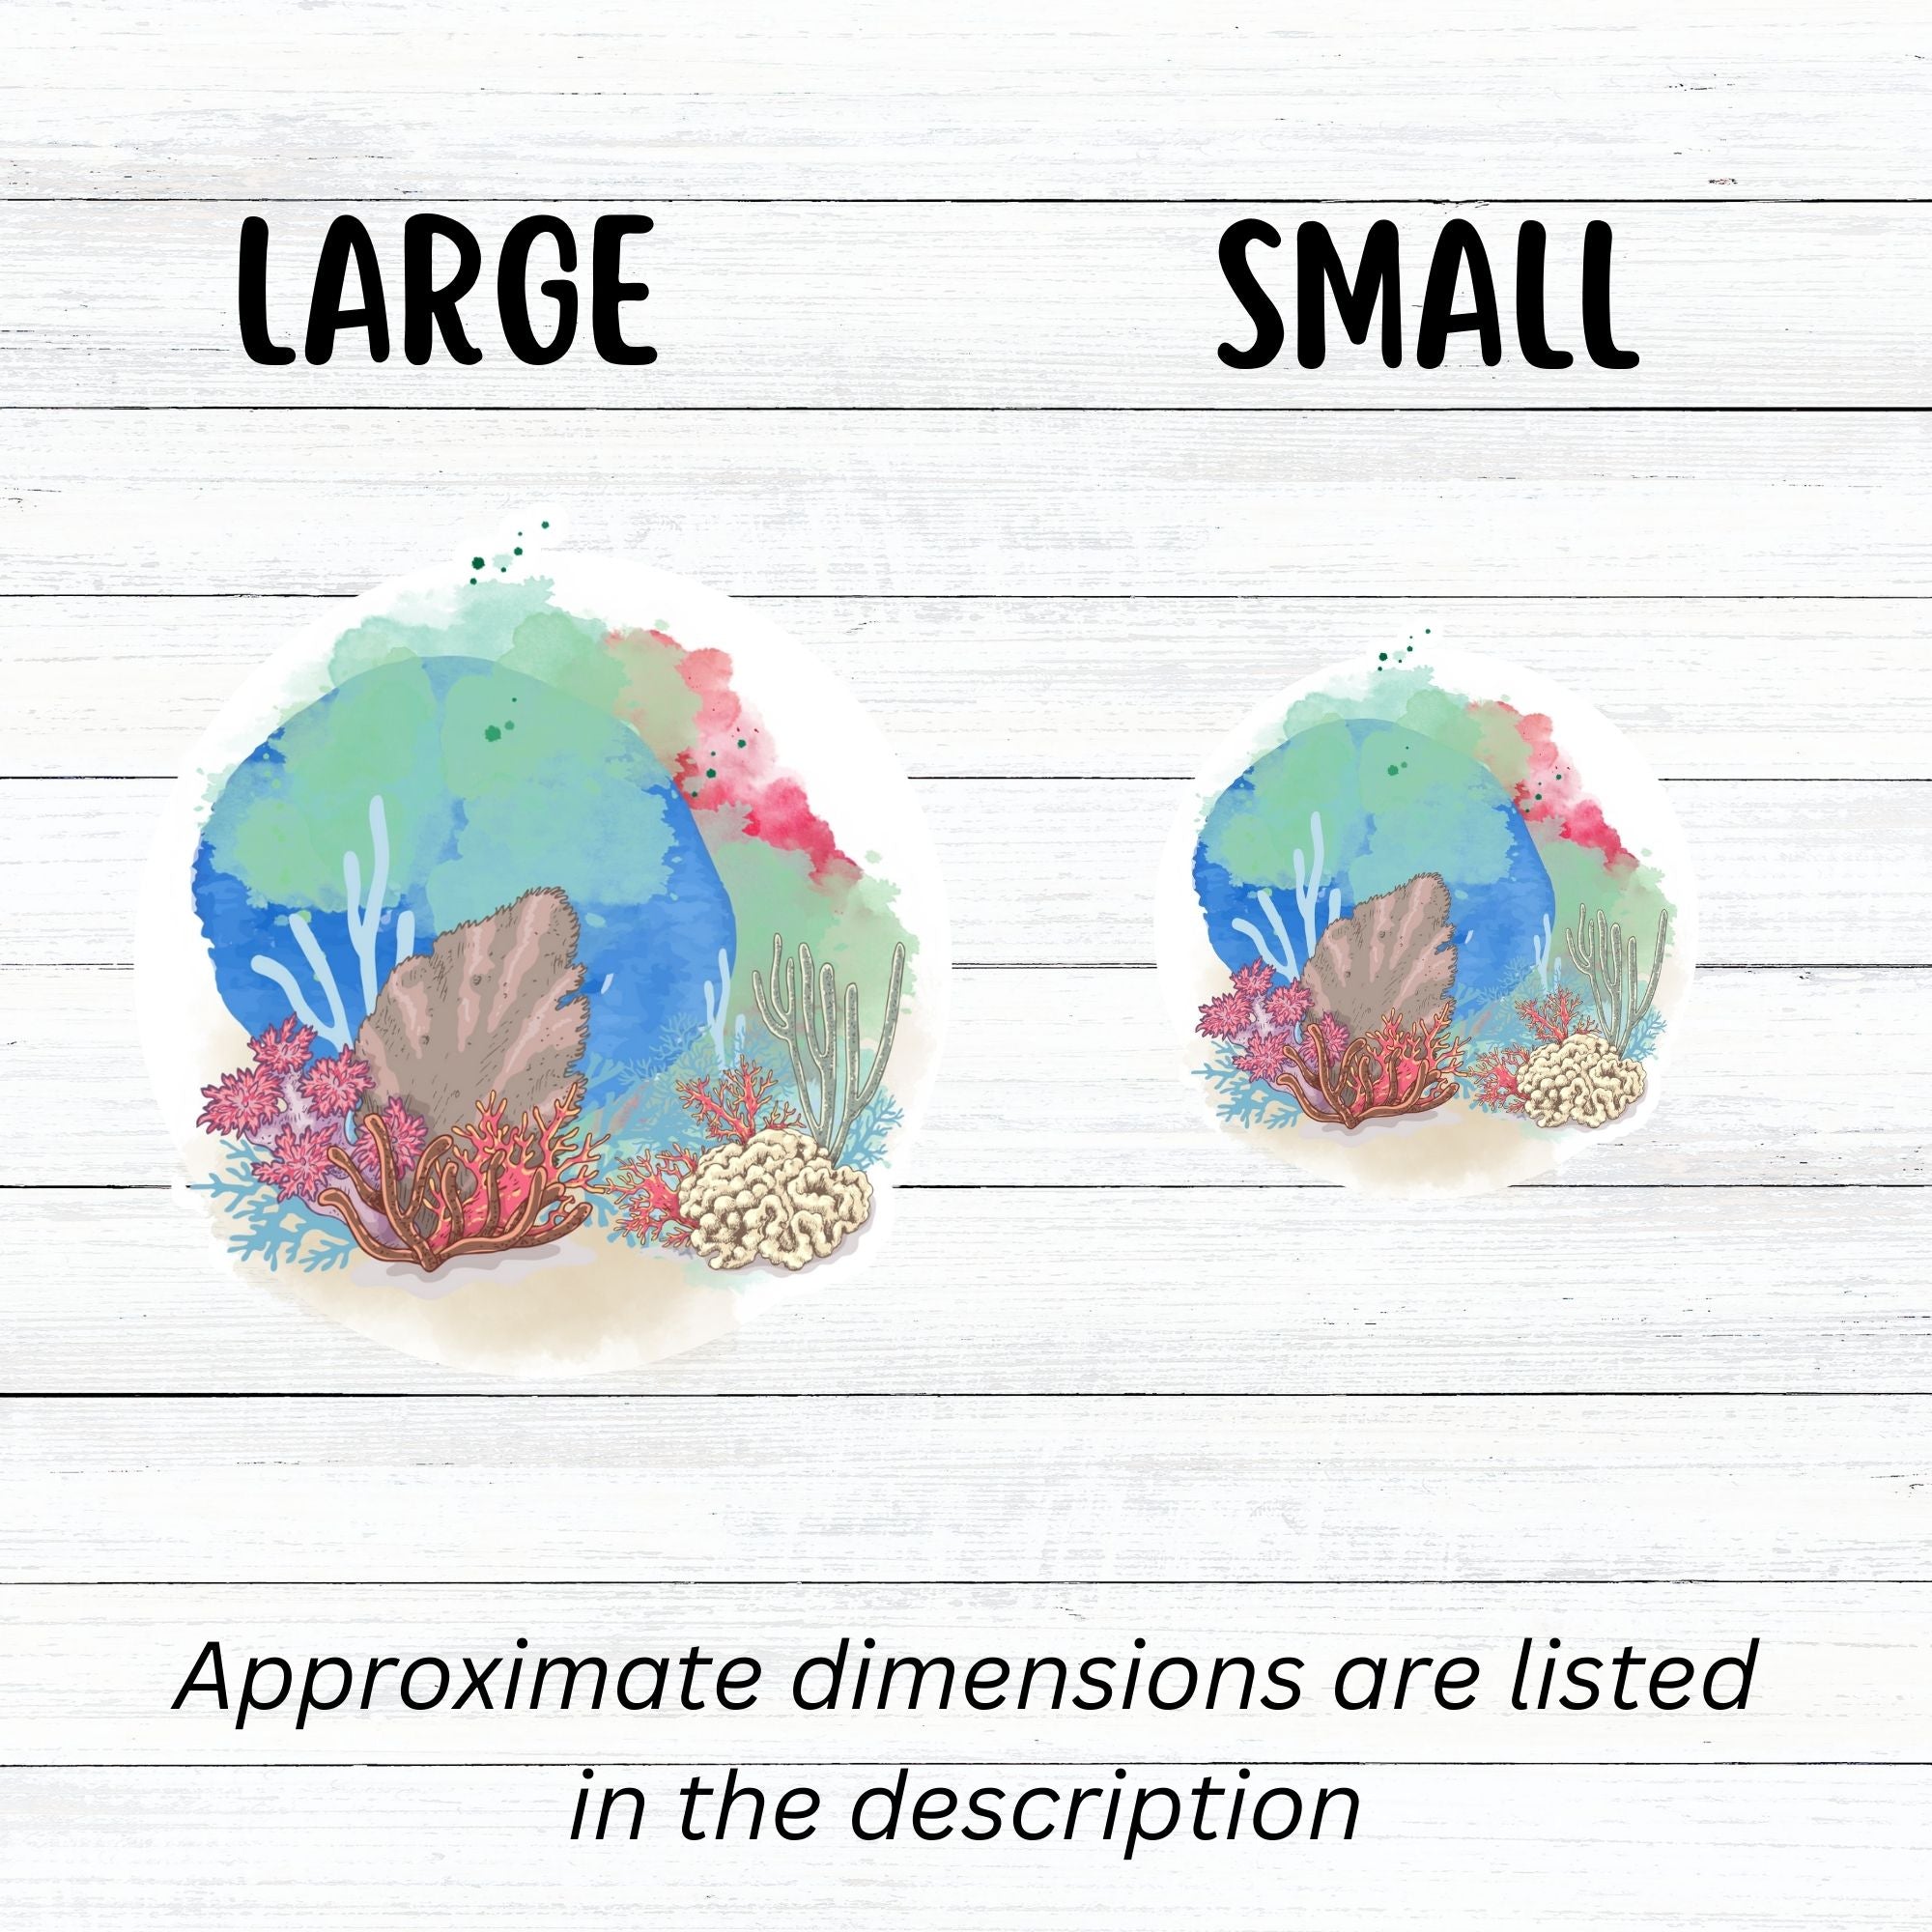 This underwater scene features corals, sand, and a pastel watercolor background on an individual die-cut sticker. With this sticker you can take the reef with you anywhere you go! This image shows large and small Watercolor Reef stickers next to each other.